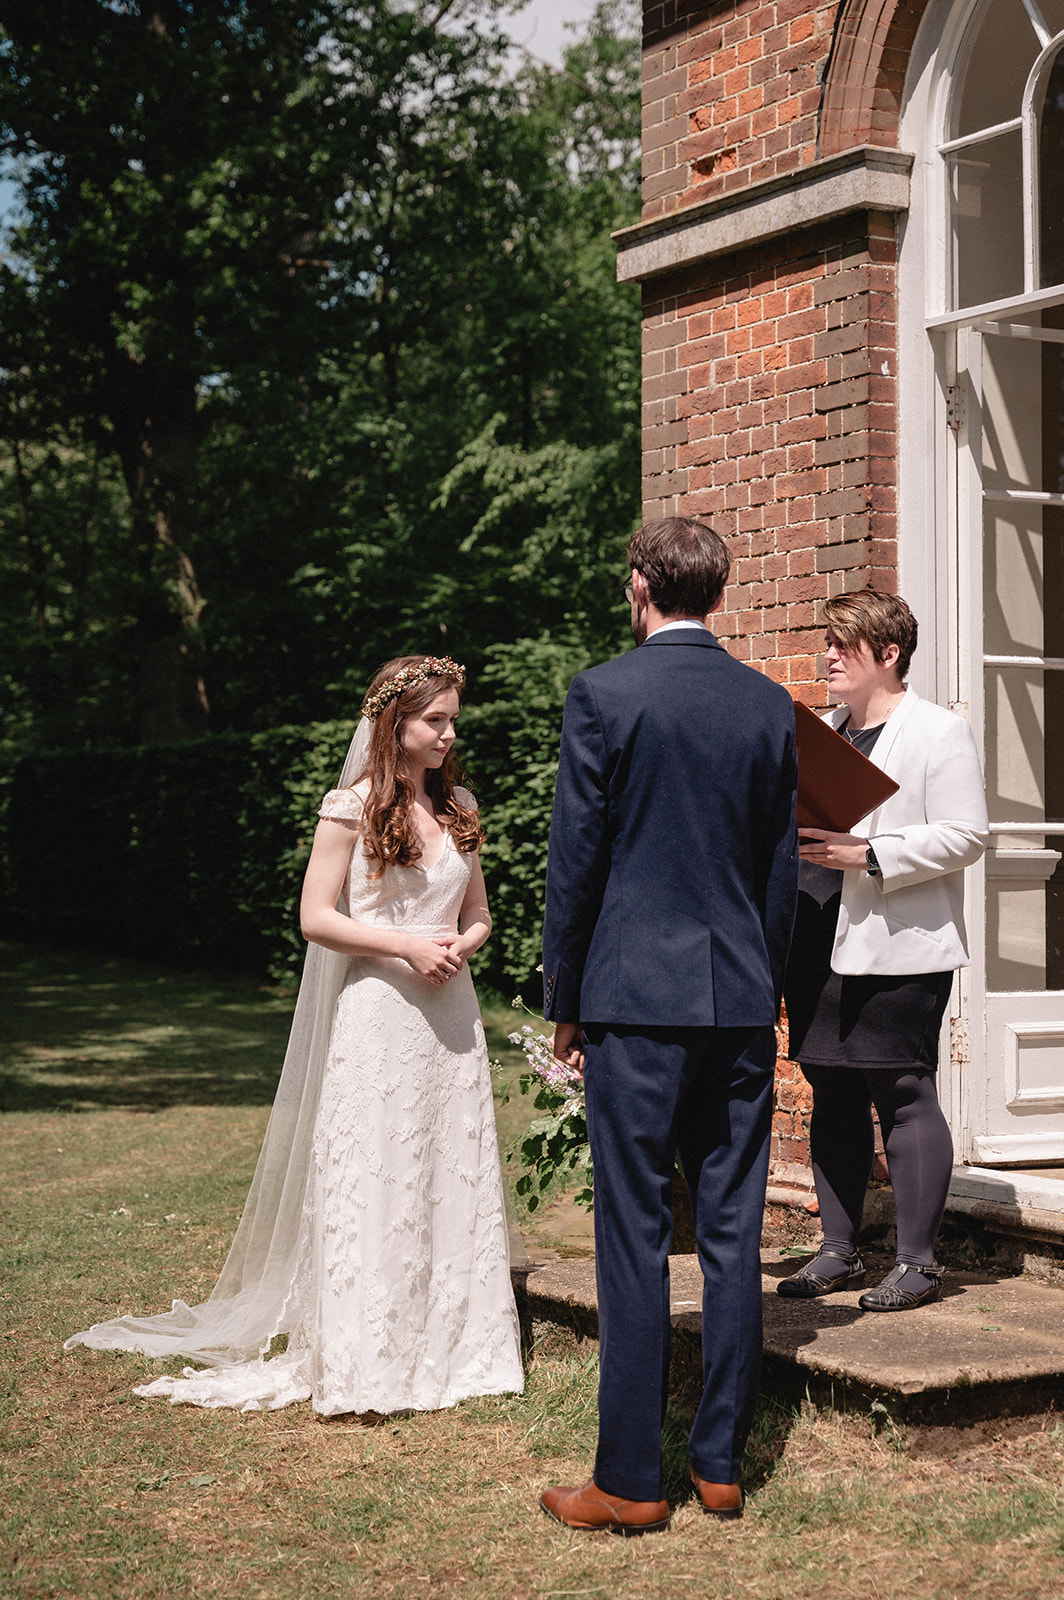 Eleanor and Hartley's  Wedding ceremony at the Organ House at St. Paul's Walden Bury